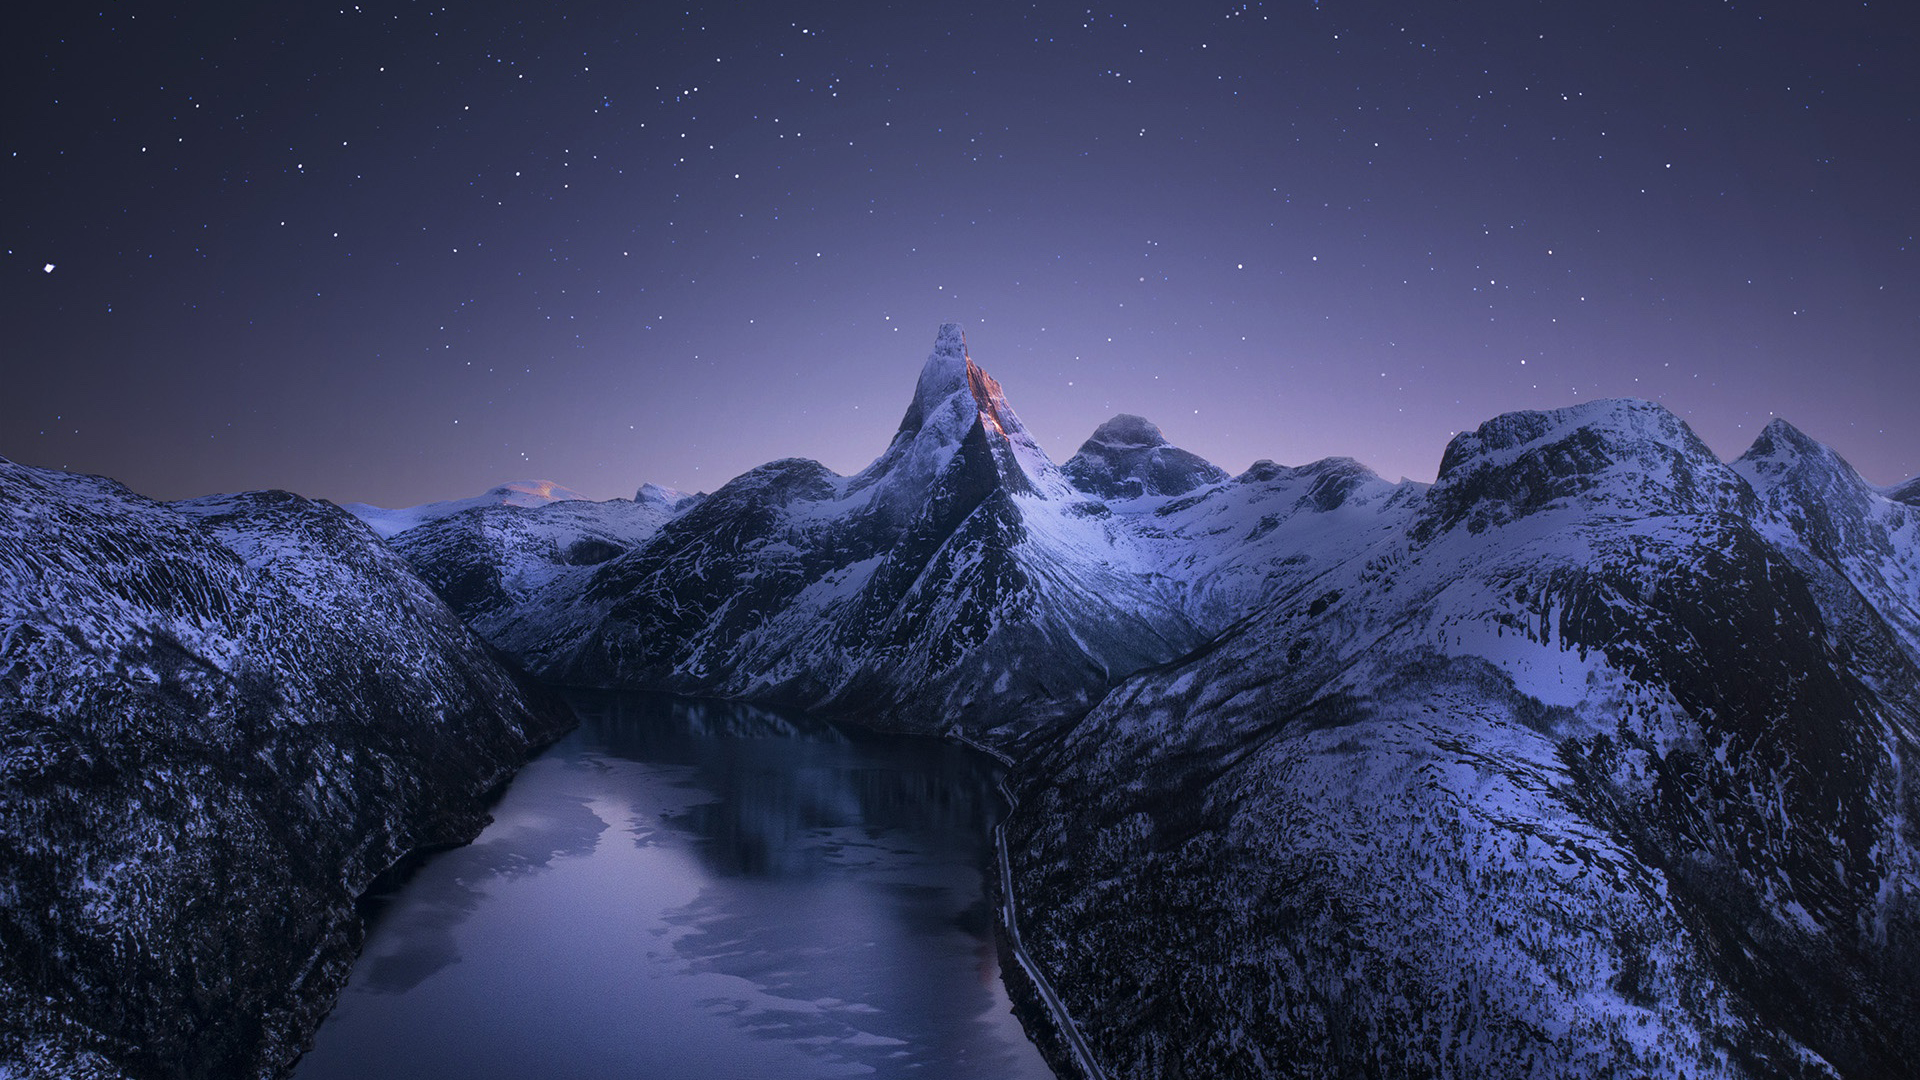 Norway Mountain With Snow And Peak Pond Under Starry Sky During Nighttime 2K Winter